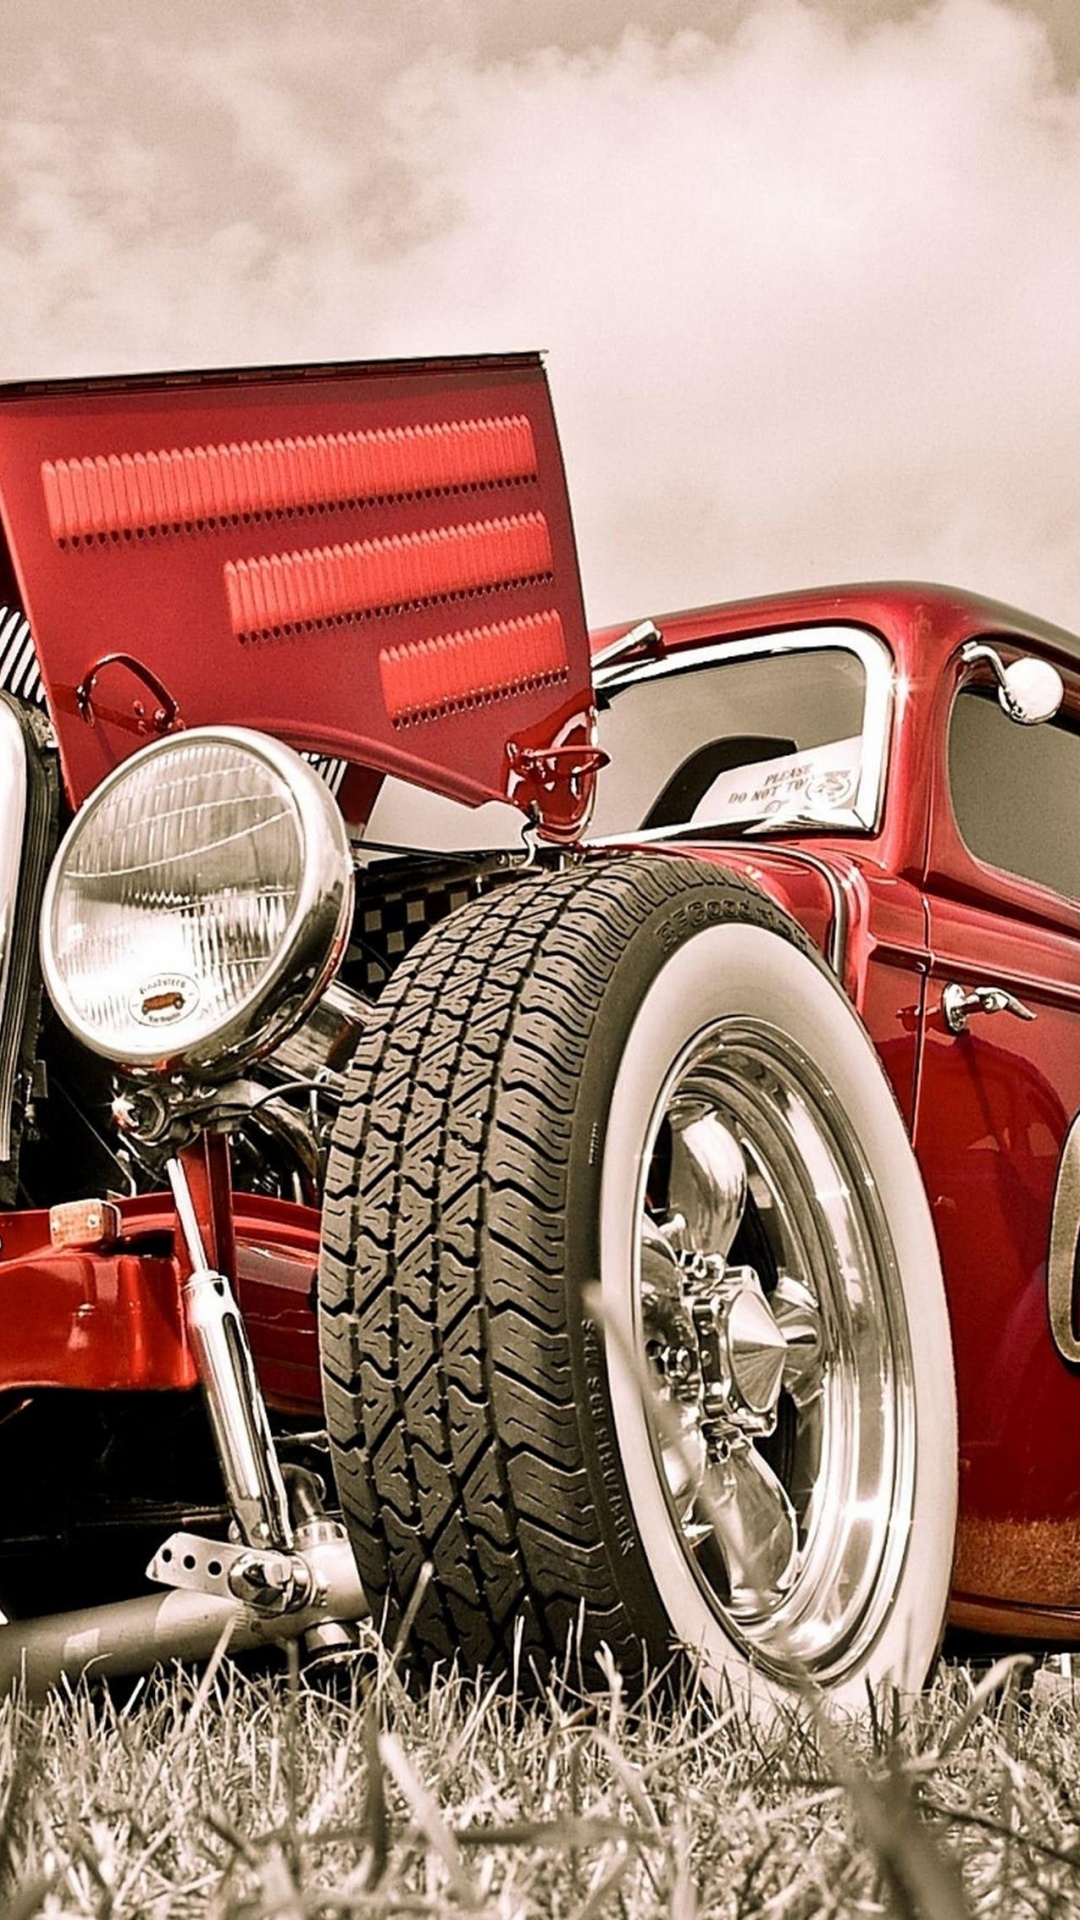 All sizes | Hot Rod Wallpaper IV 27'' iMac by The Pixeleye | Flickr - Photo  Sharing!